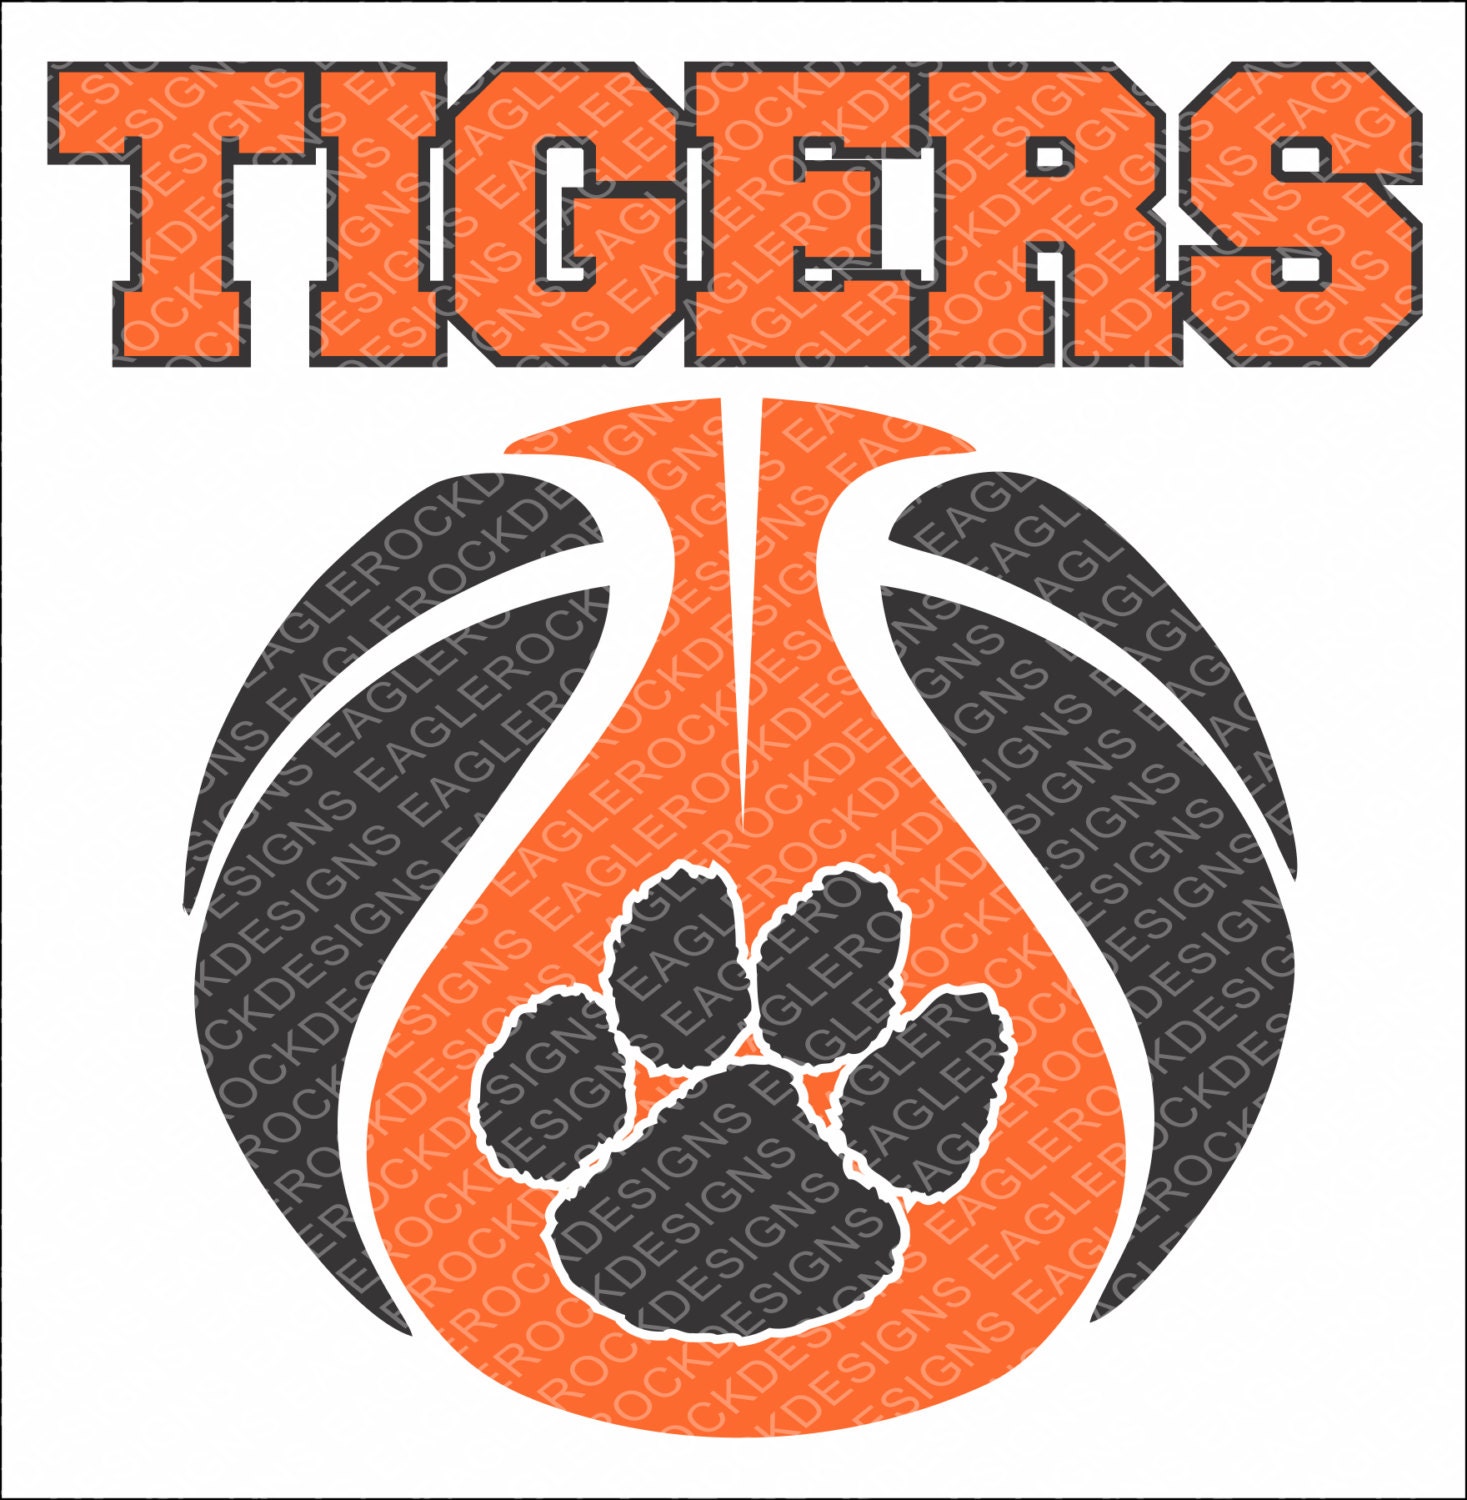 Download Tigers Basketball| SVG| DXF| EPS| Cut File| Tigers ...